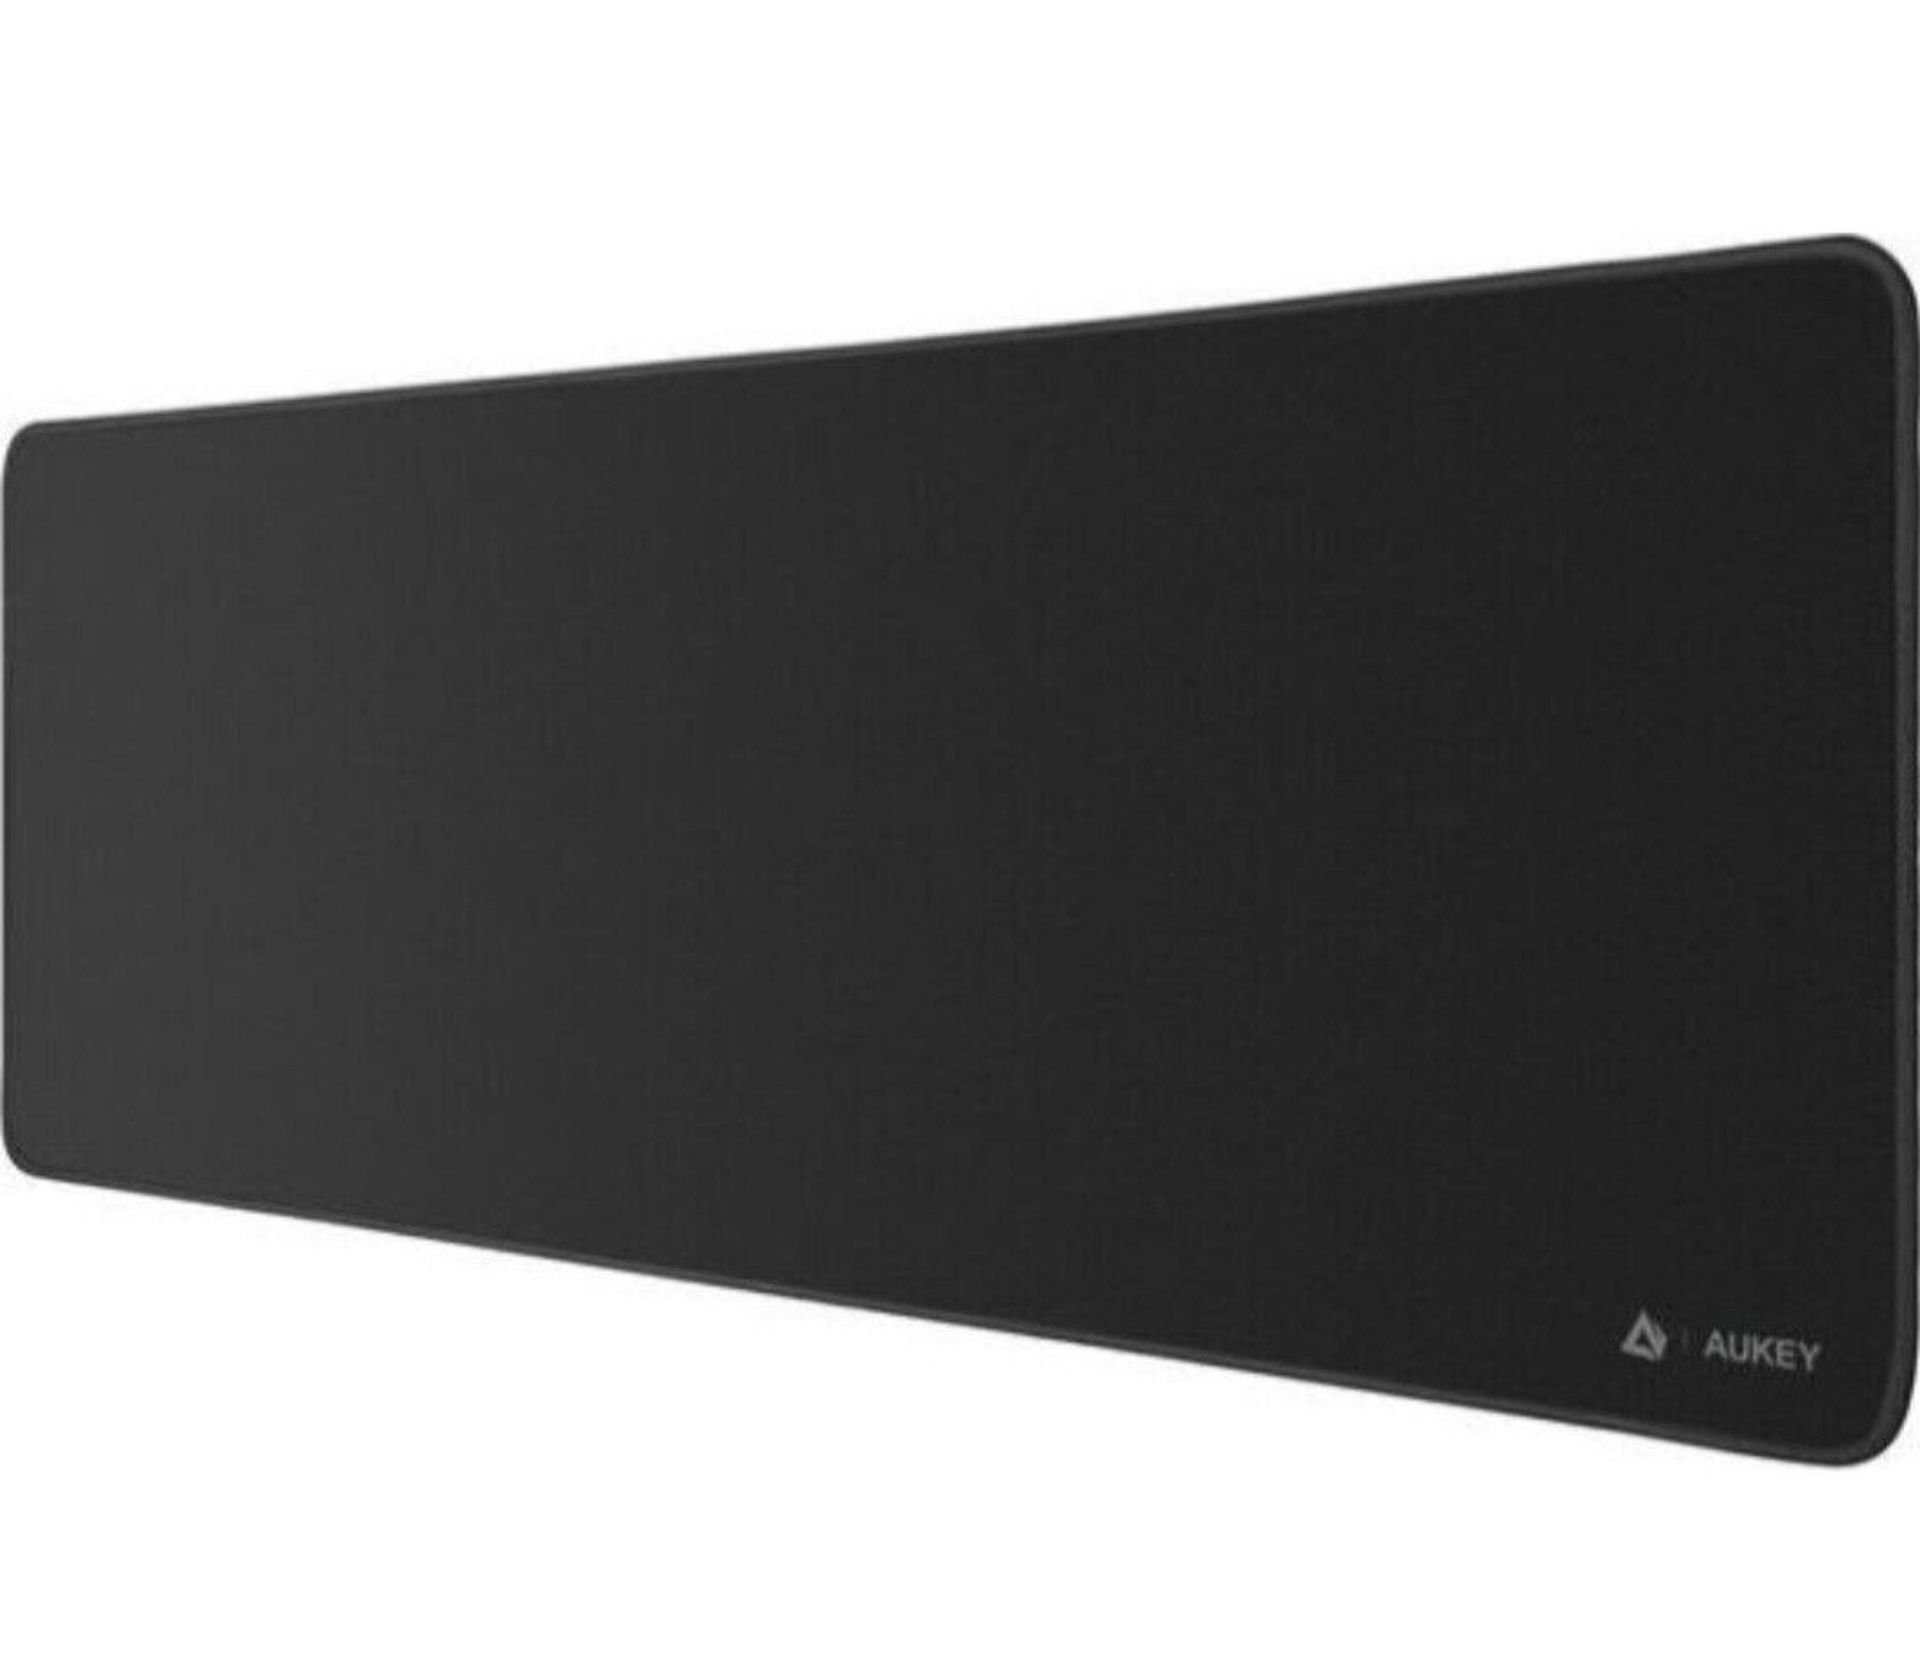 520 X AUKEY MOUSE MATS - Image 4 of 4